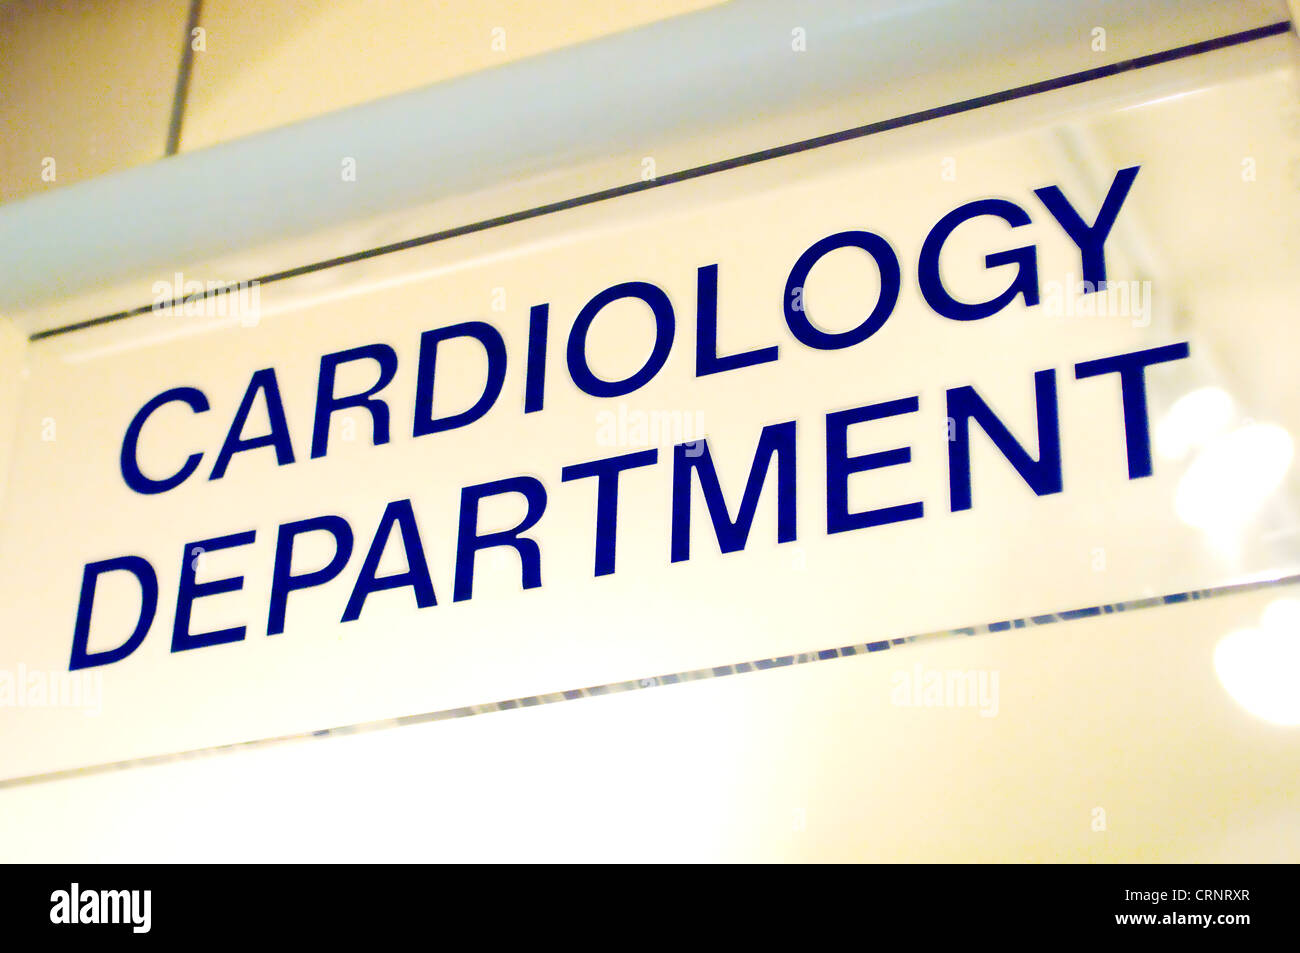 Cardiology Department sign Stock Photo